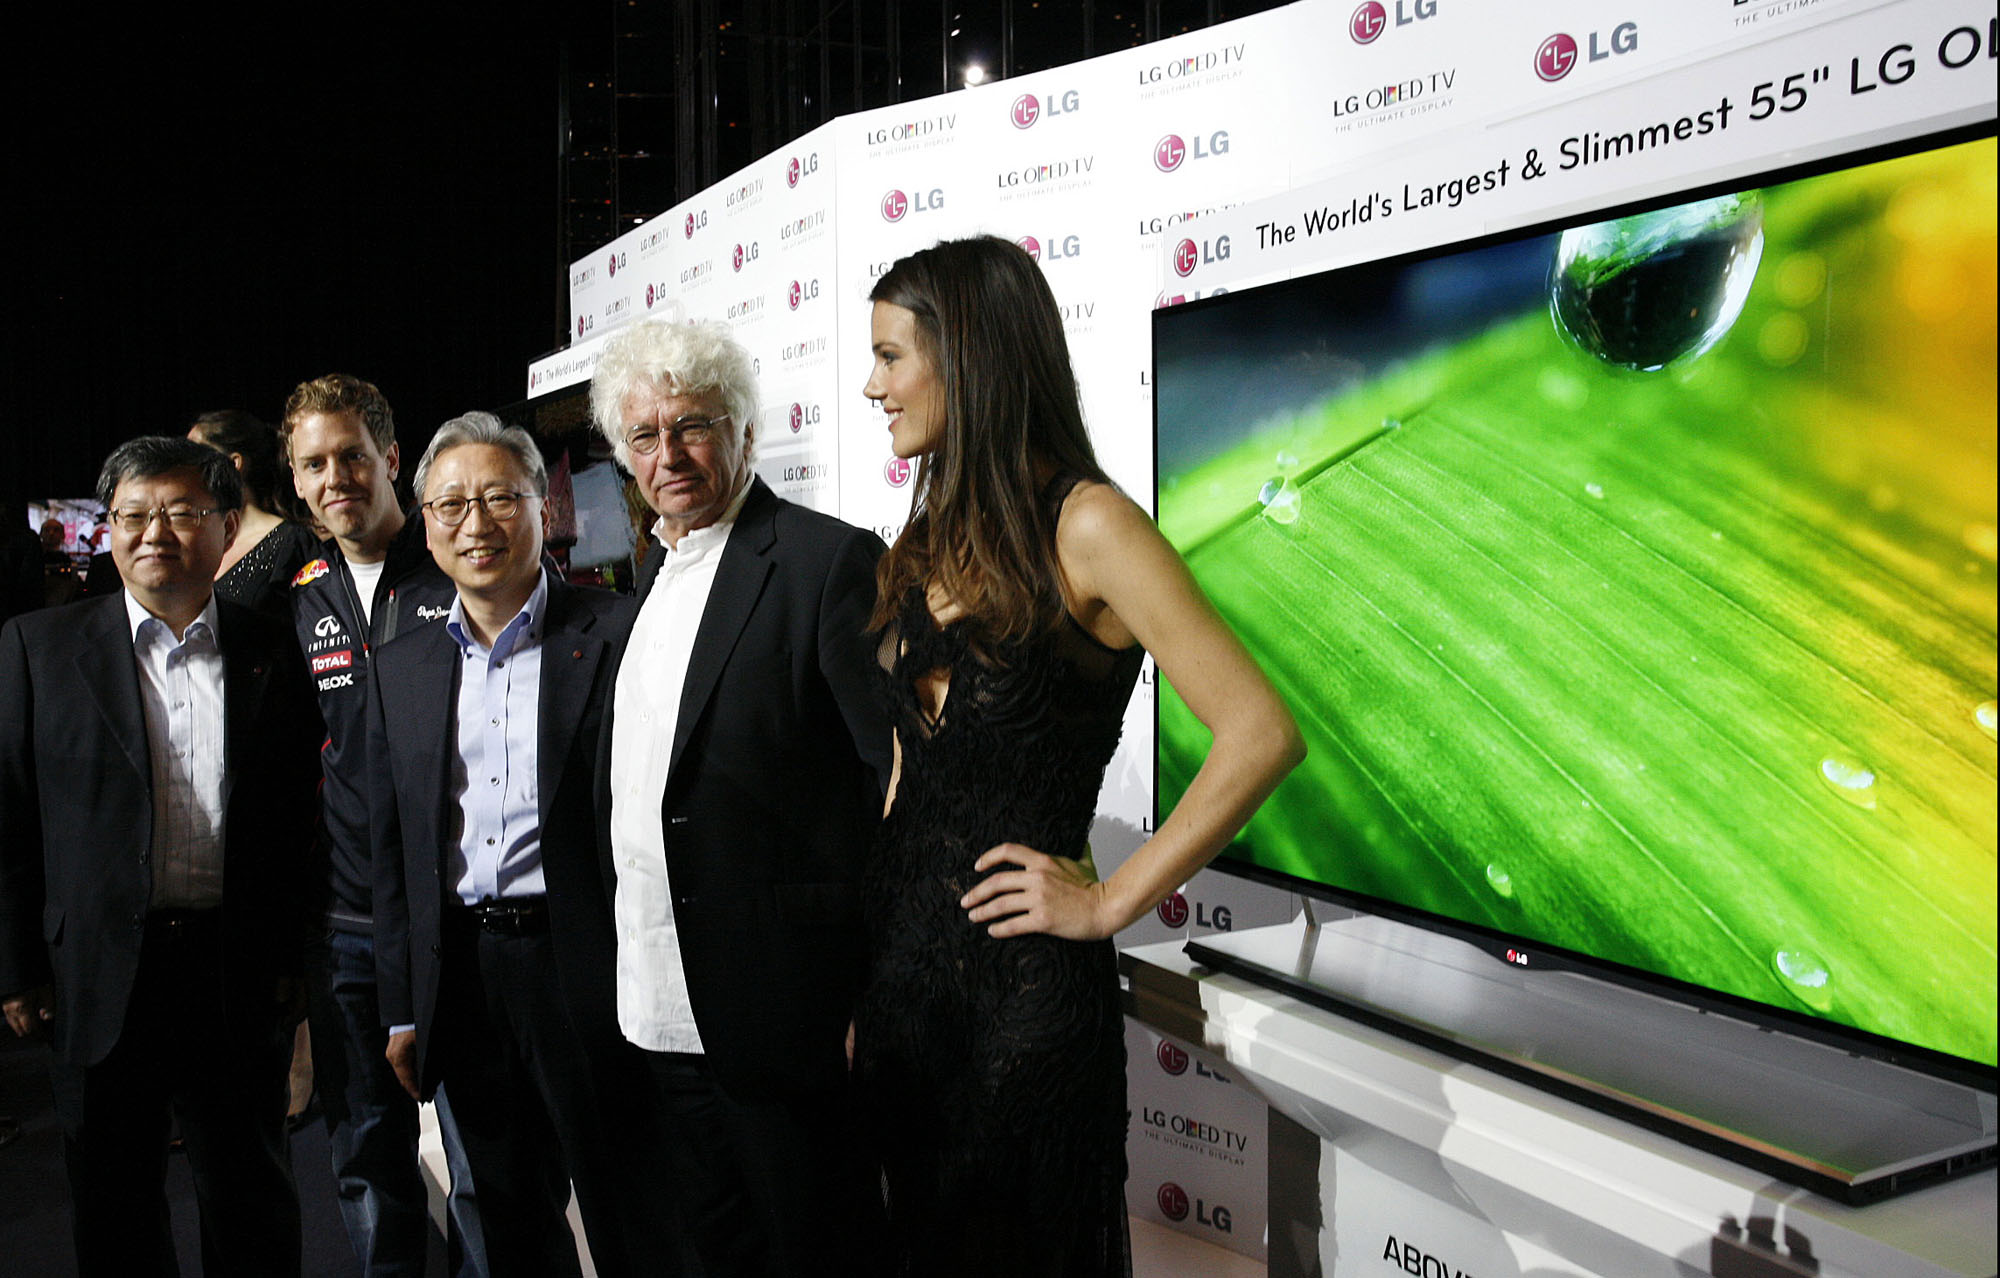 From left to right: LG’s vice president of Overseas TV Sales and Marketing Ki-il Kwon, F1 Champion Sebastian Vettel, LG Europe Head Stanley Cho, film director Jean-Jacques Annaud and model Gemma Sanderson pose in front of LG’s 55-inch OLED TV in Monaco